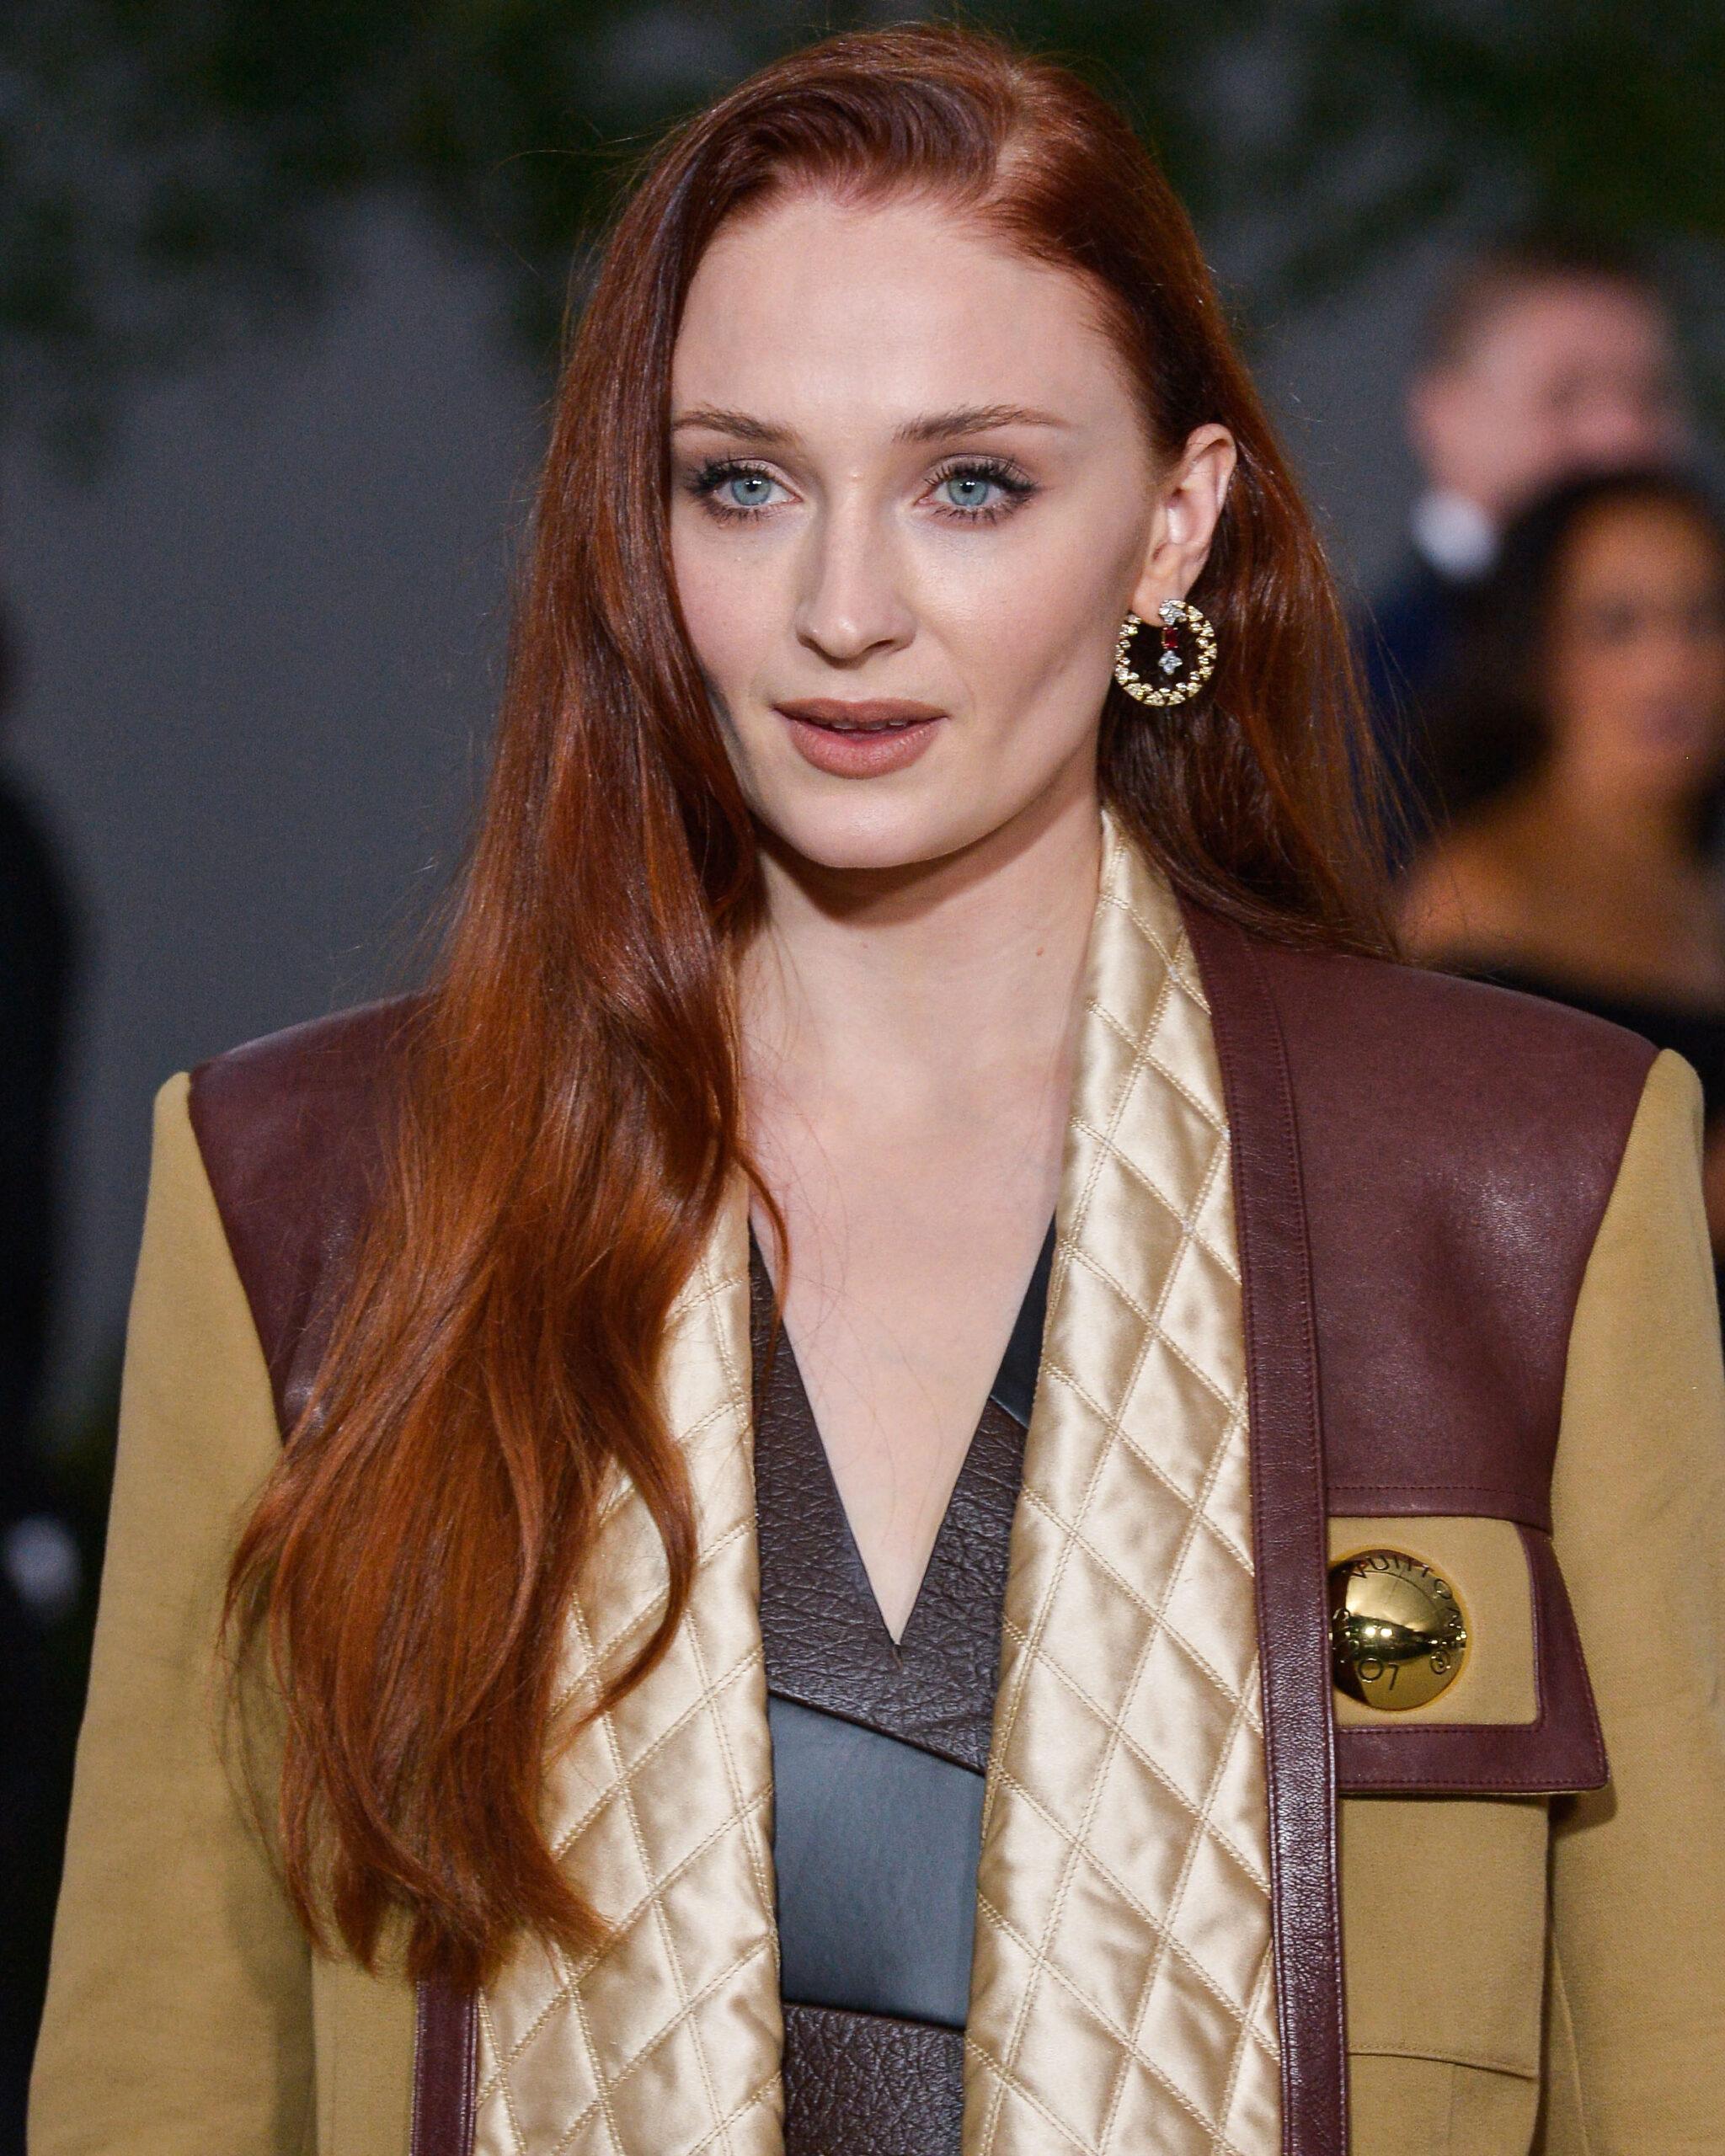 Sophie Turner arrives at 2nd Annual Academy Museum of Motion Pictures Gala 